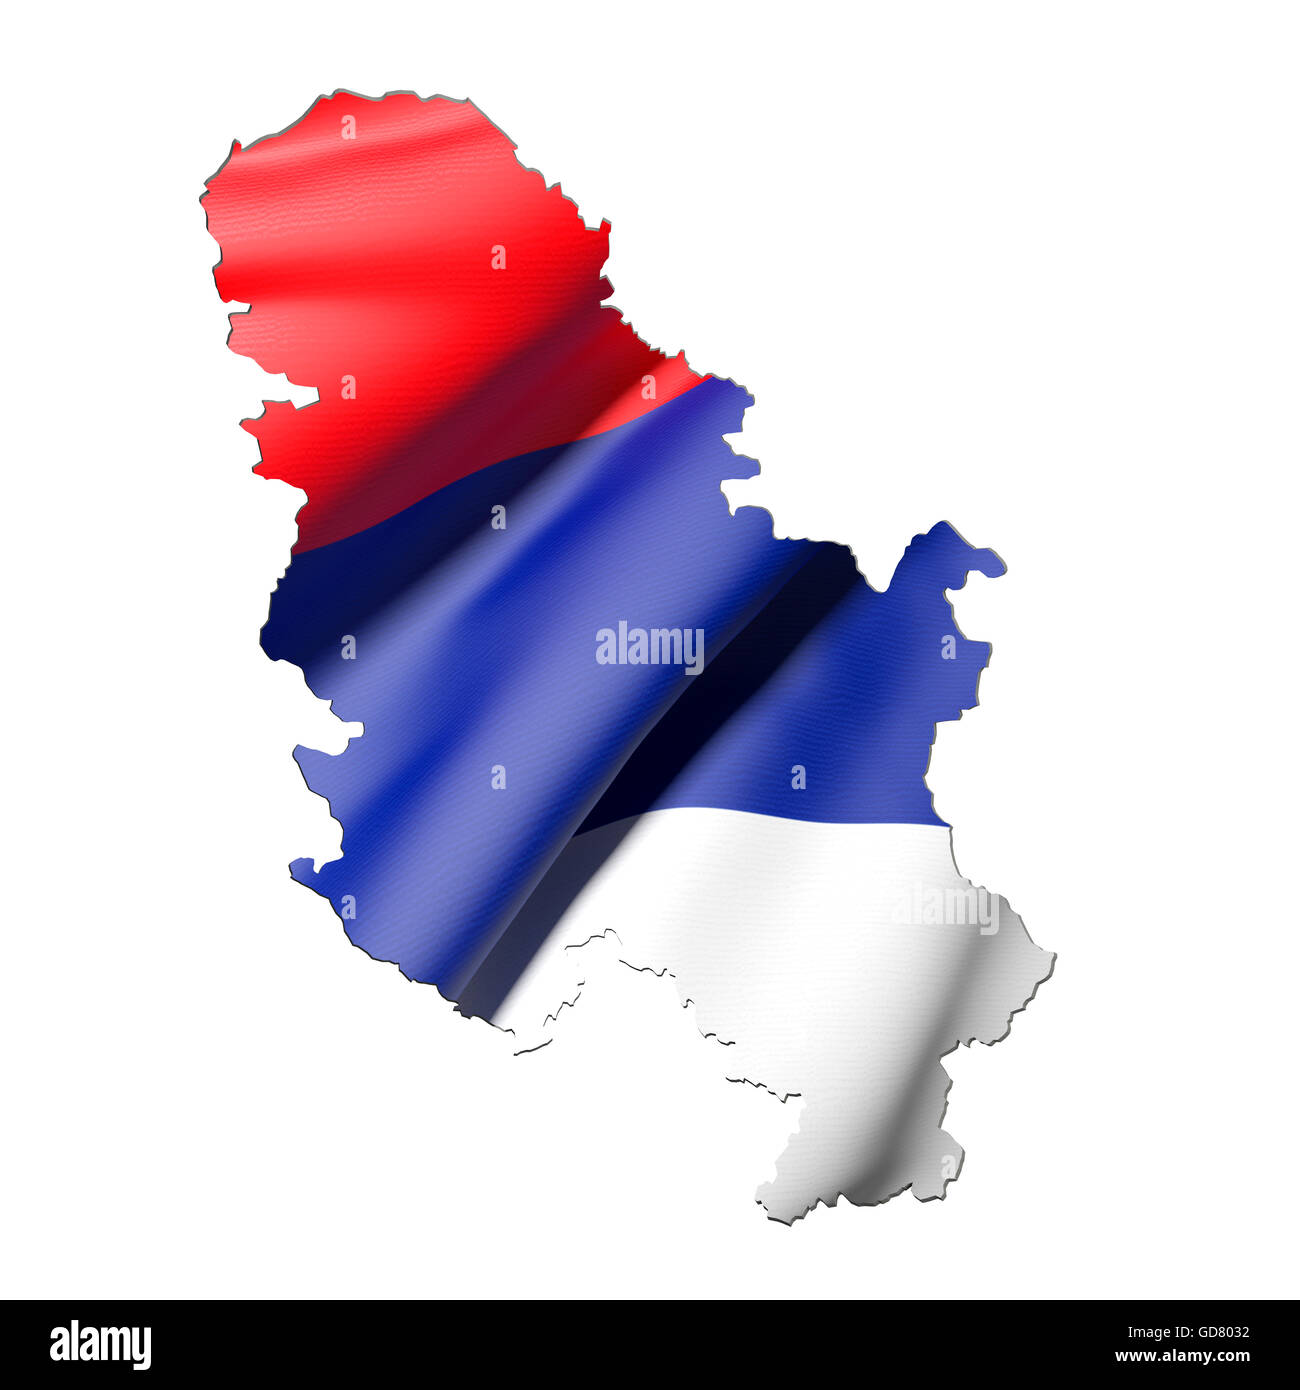 3d rendering of Serbia map and flag on white background. Stock Photo